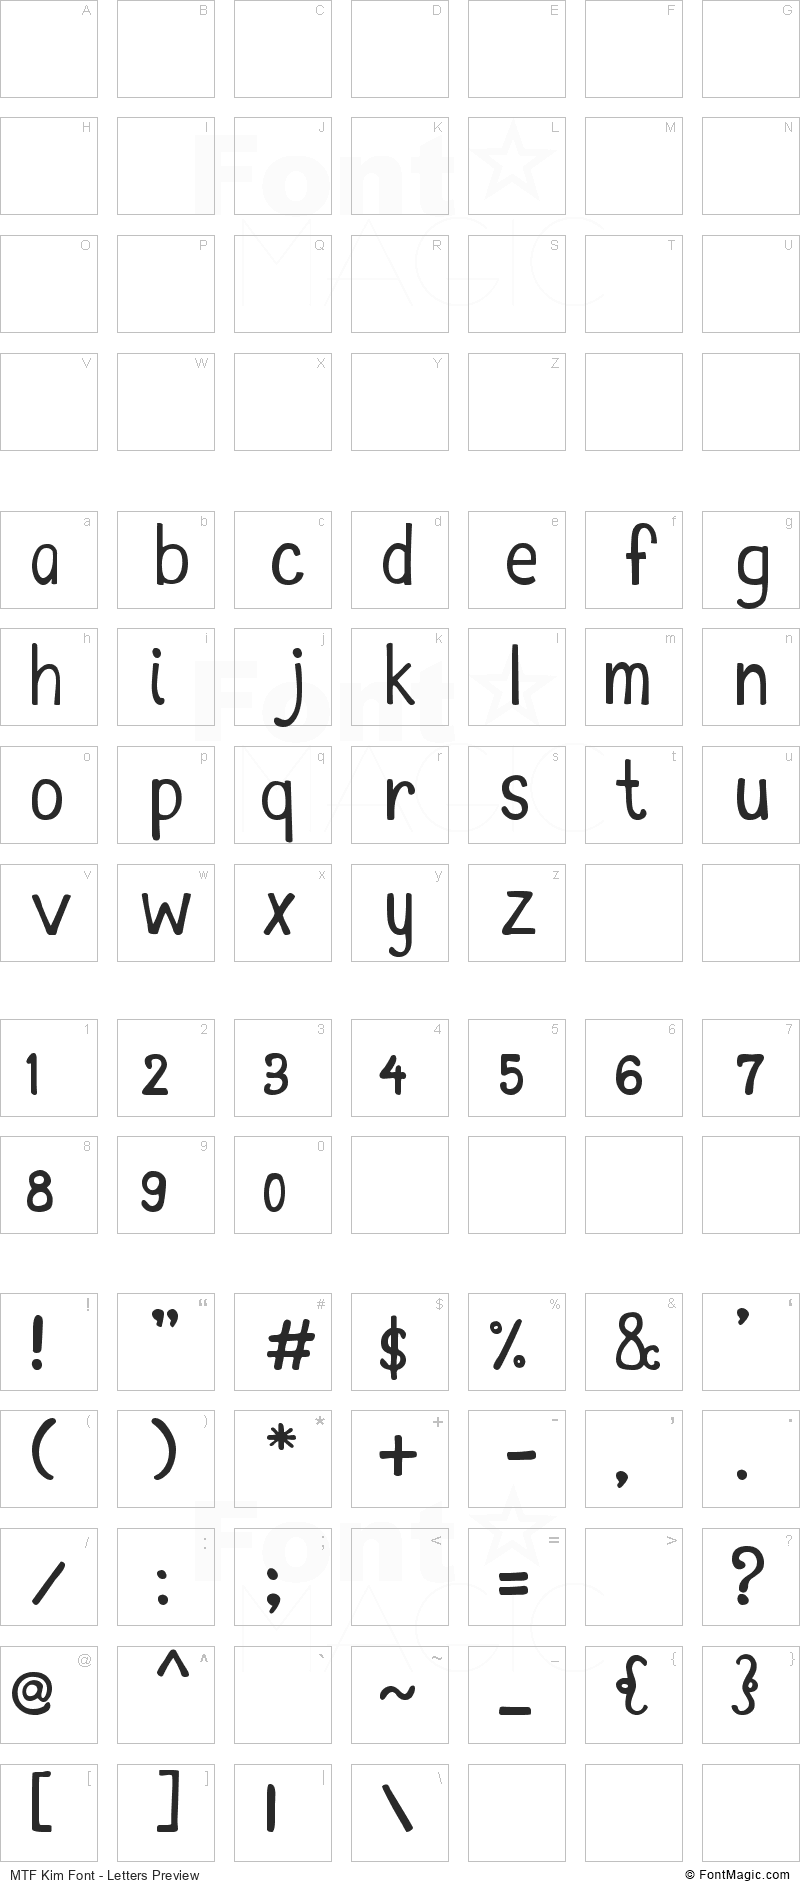 MTF Kim Font - All Latters Preview Chart